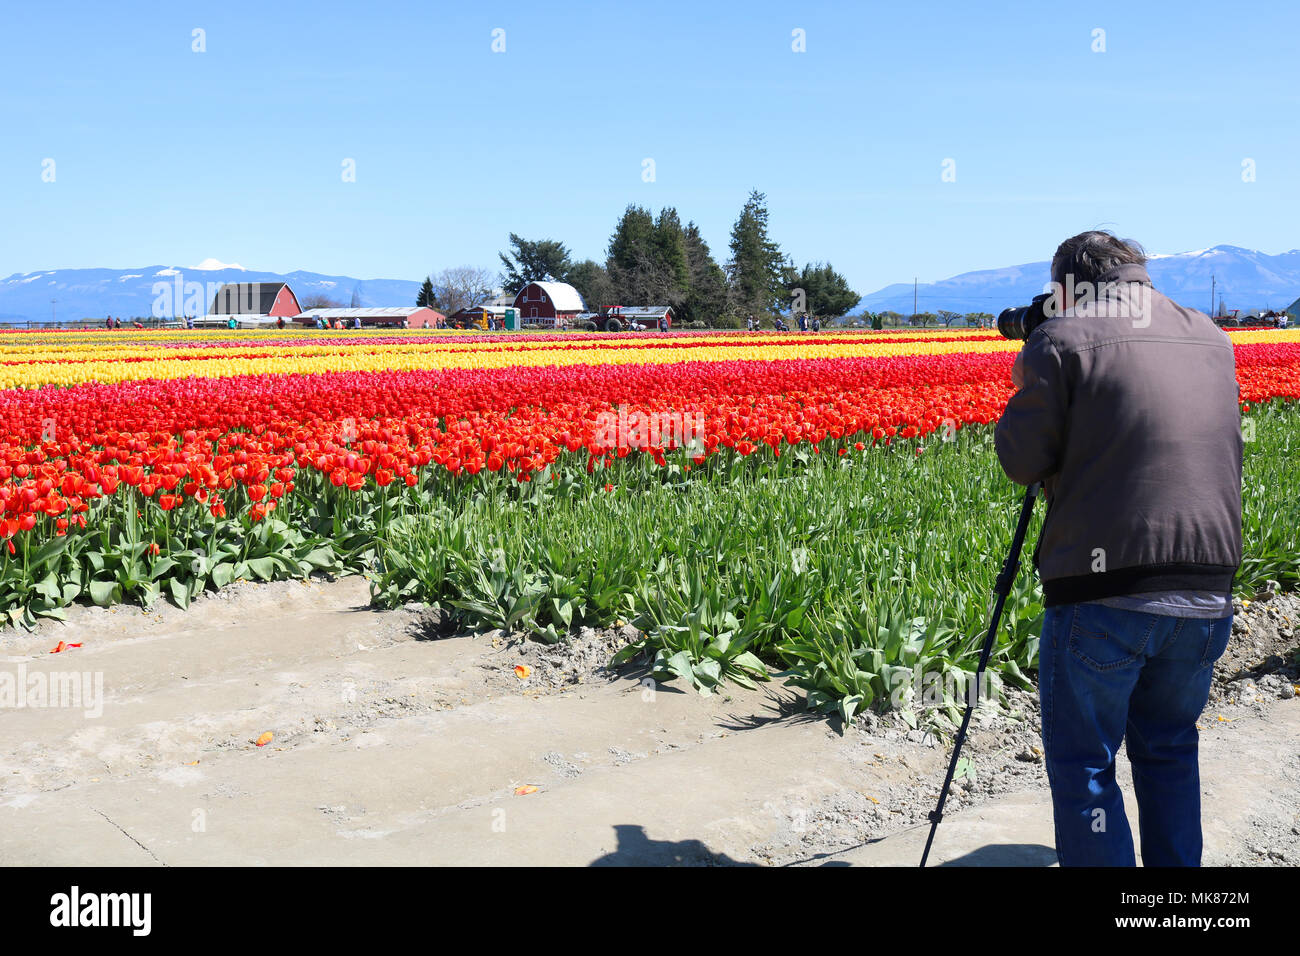 An older man taking photos of the tulip fields and barns using a tripod during the Skagit Valley Tulip Festival in Mount Vernon, WA, USA. Stock Photo